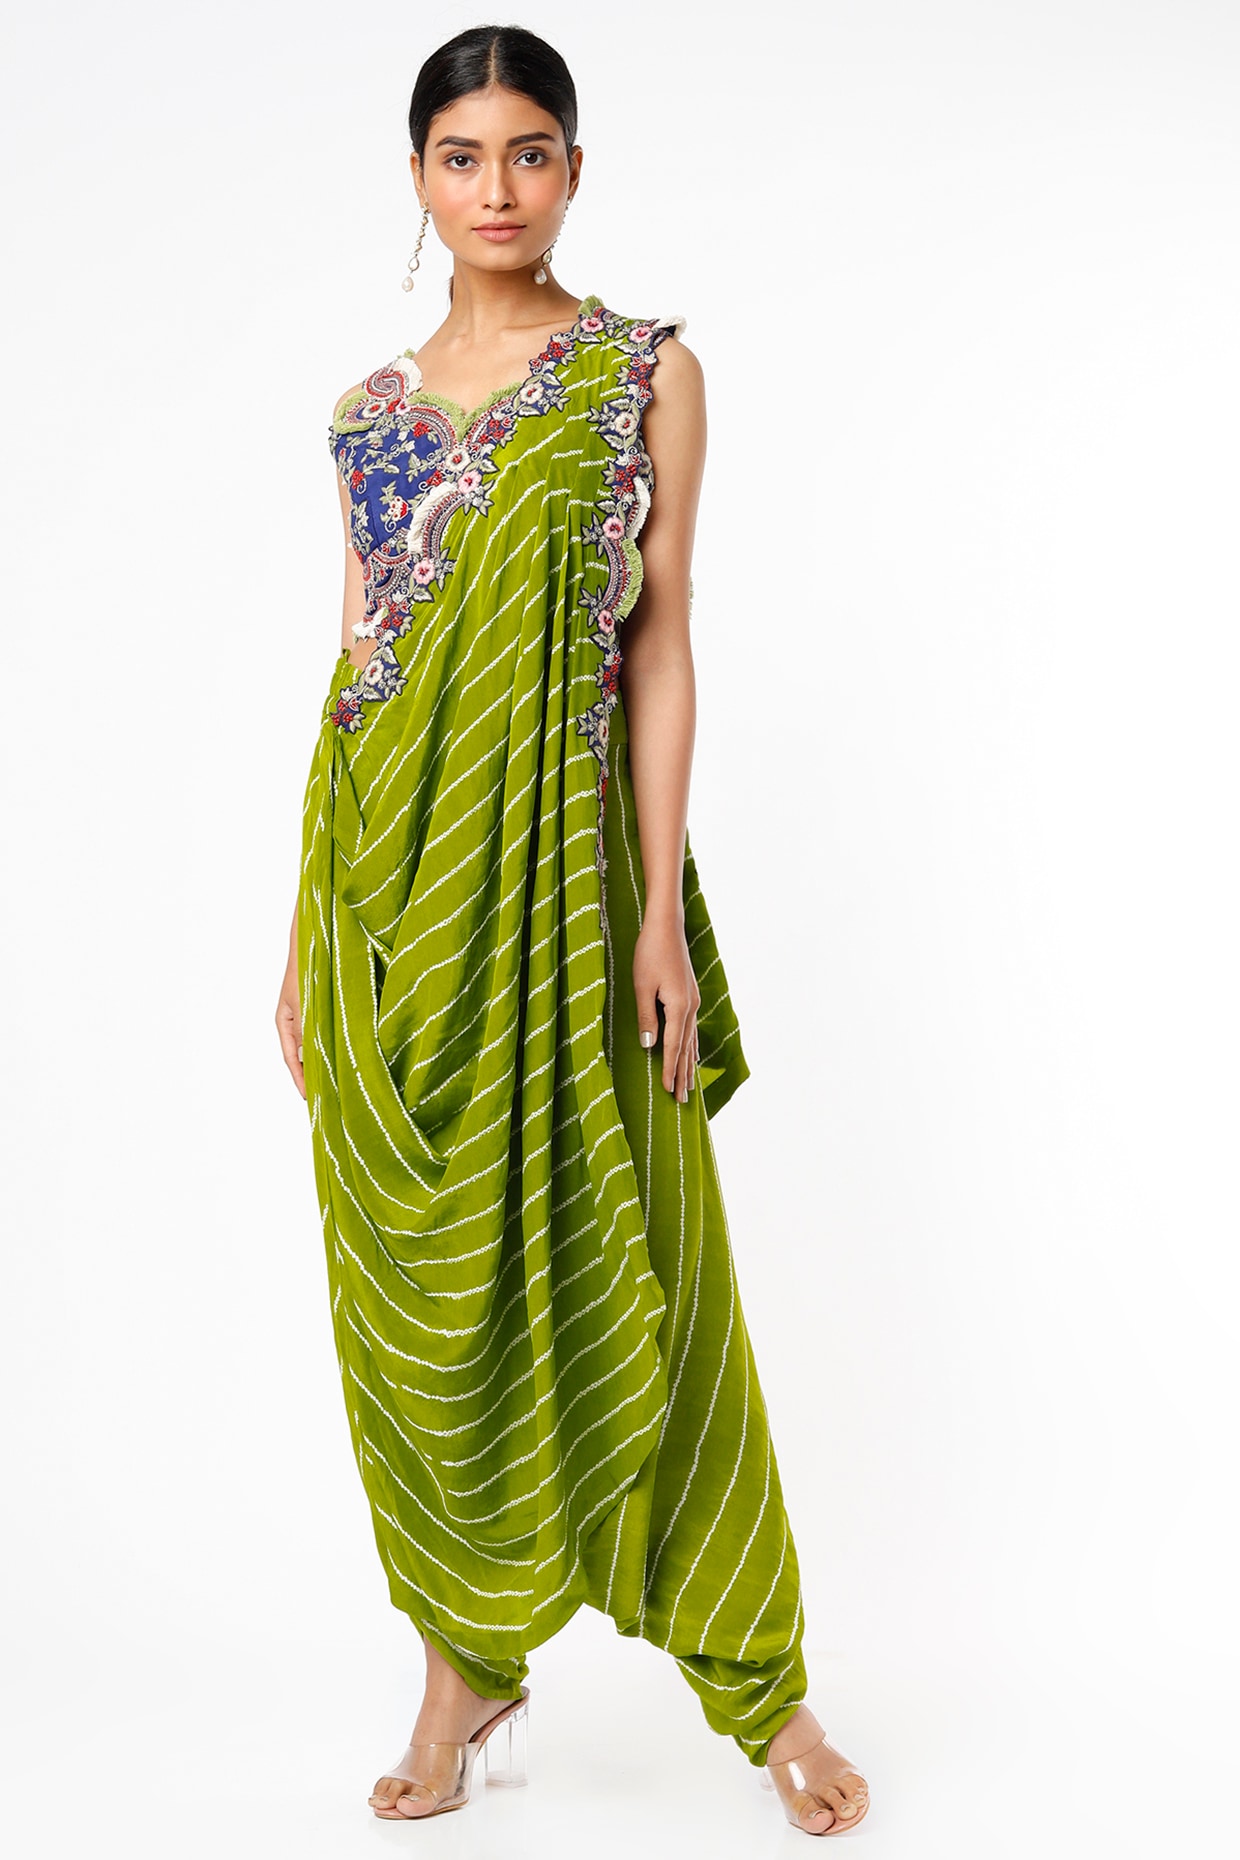 Amazon.in: Dhoti Saree For Women Party Wear